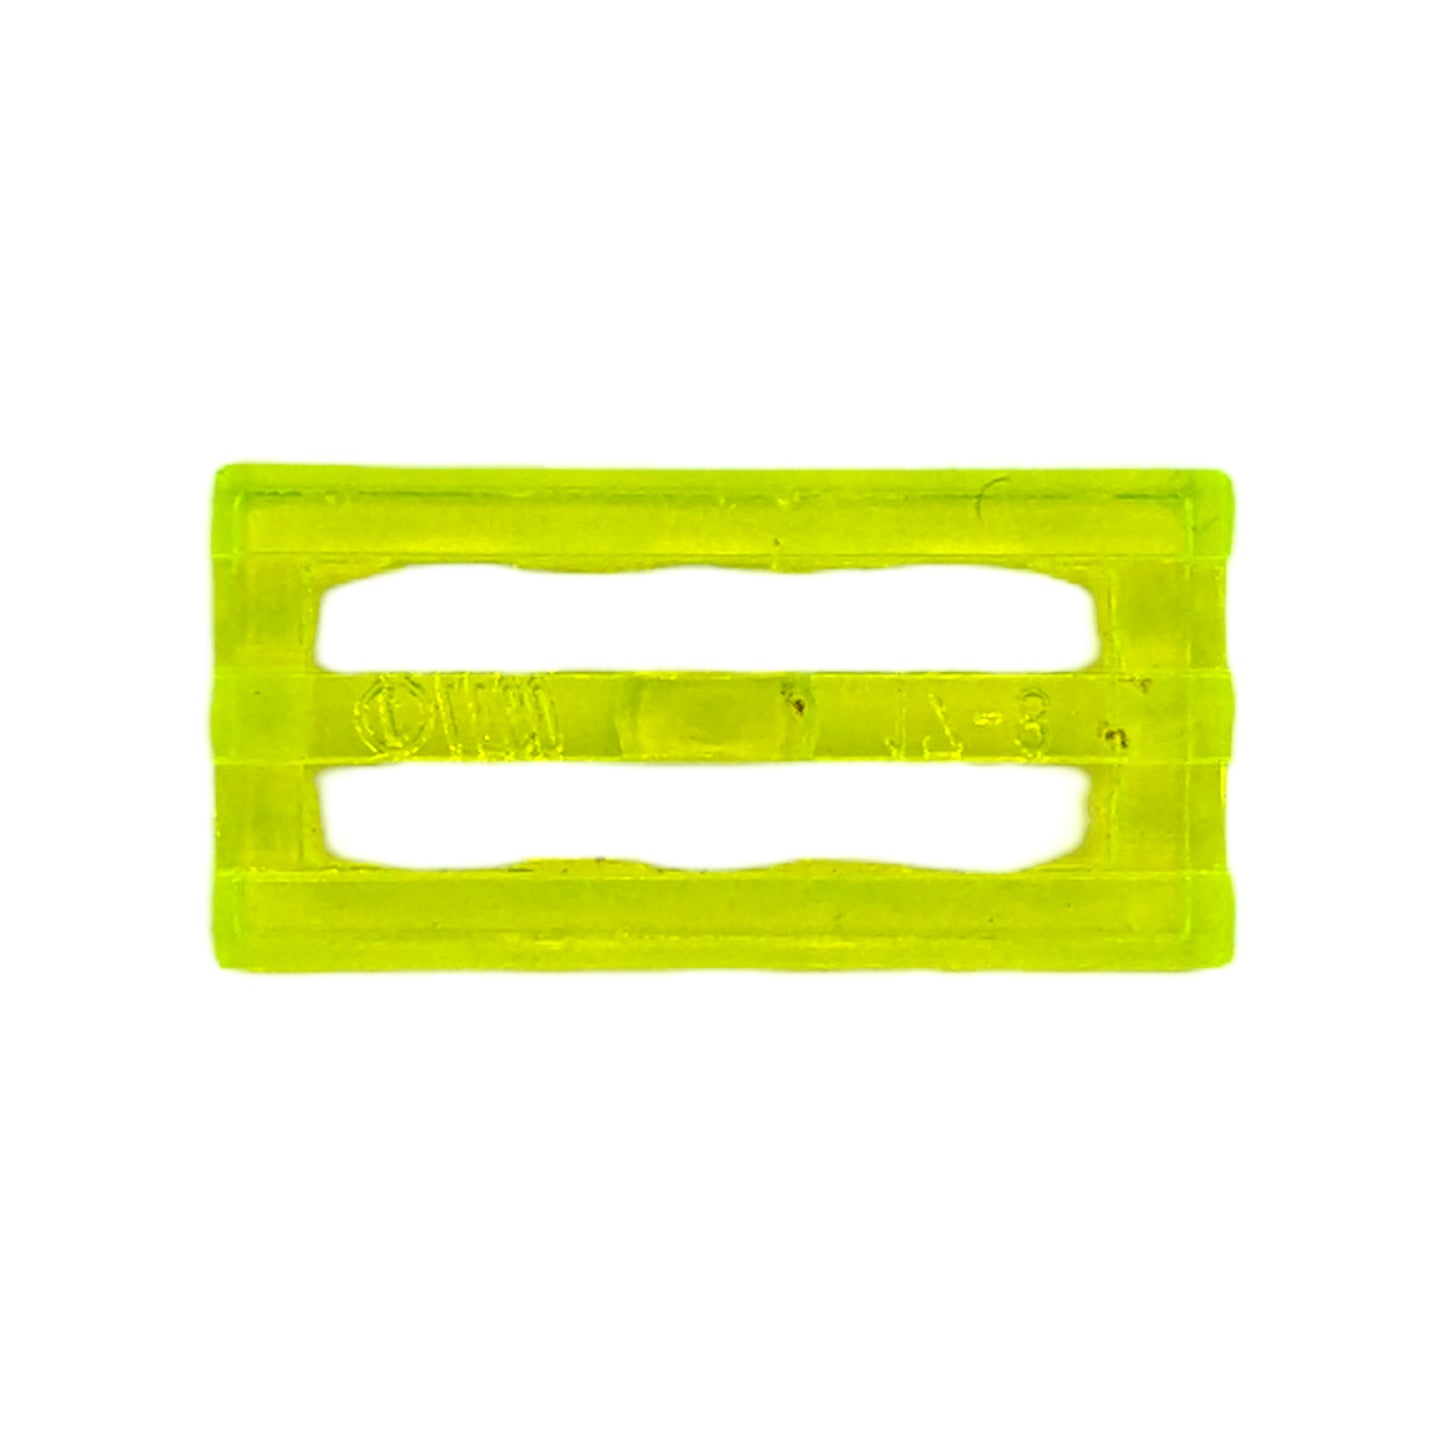 LEGO Tile Modified 1x2 - Grill in Trans-Neon Green